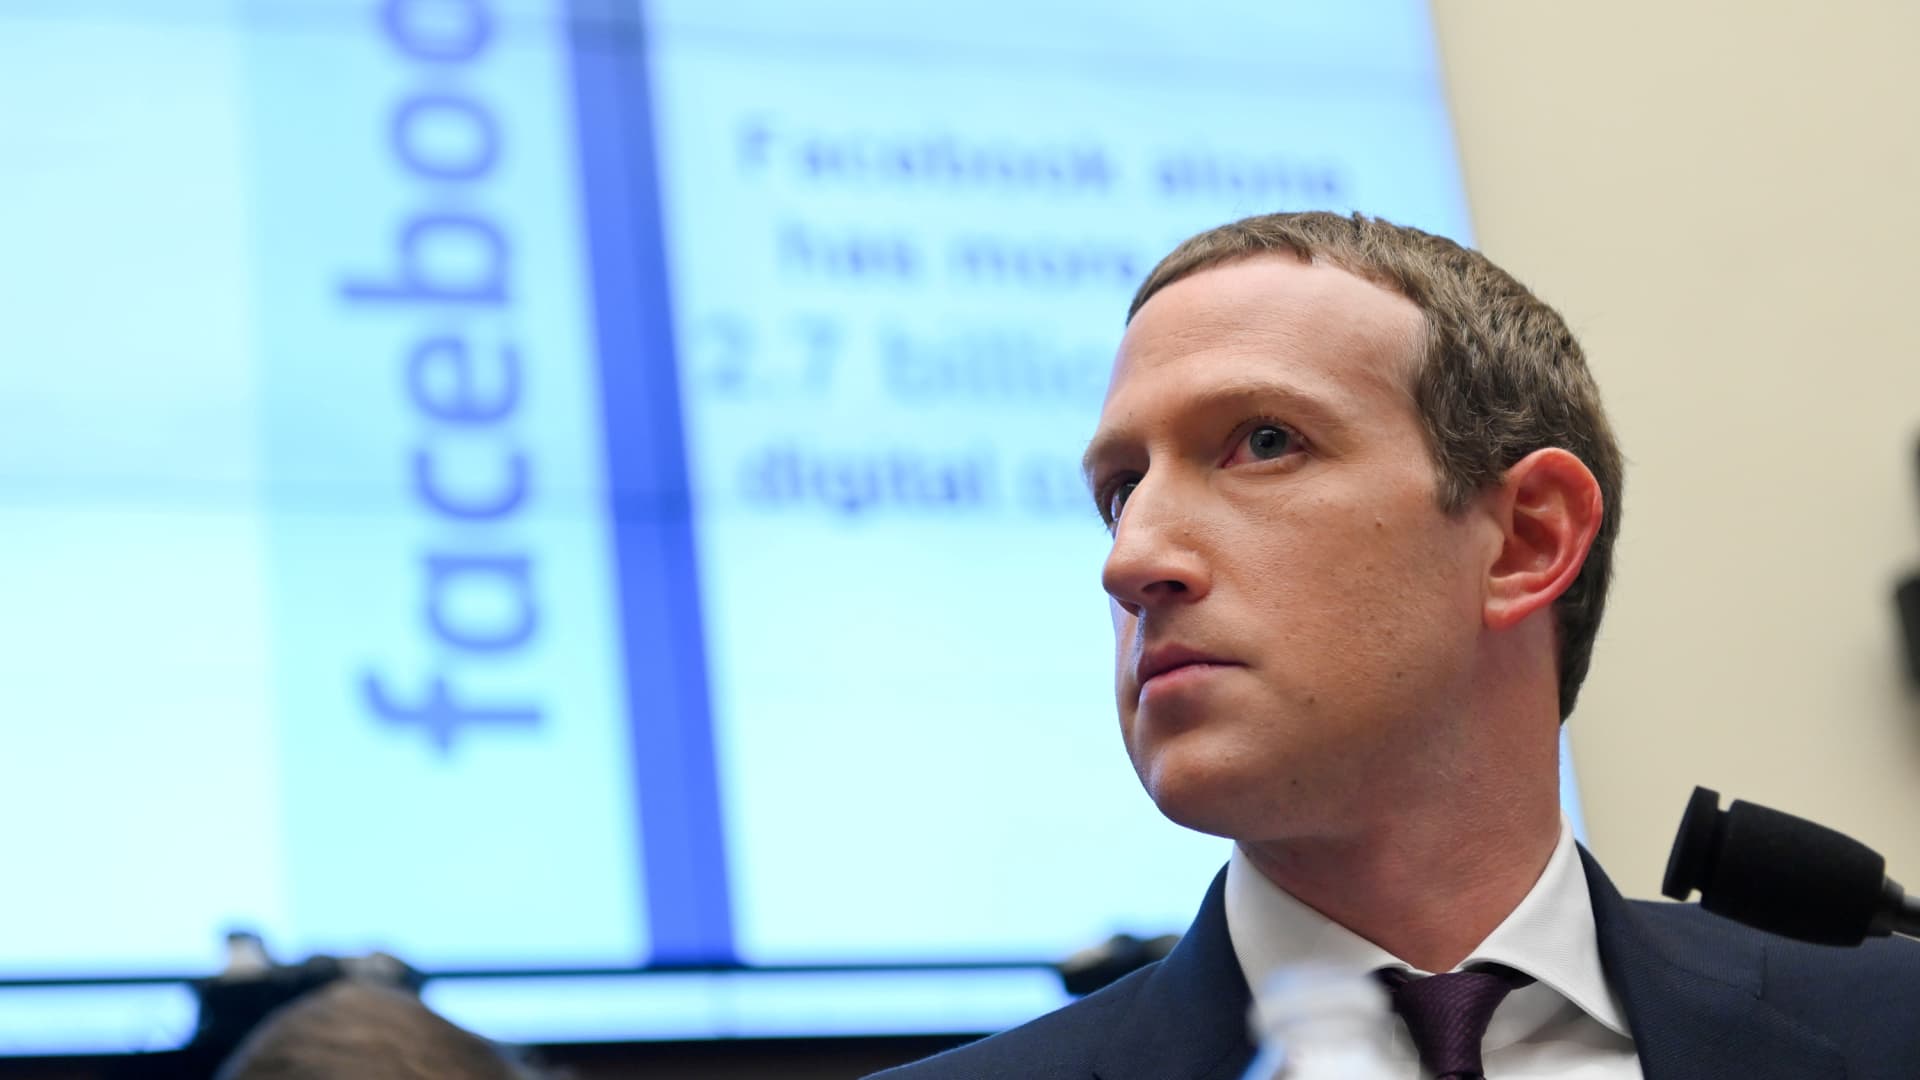 Facebook was the main donor to a group that fought antitrust reforms in 2020 and 2021